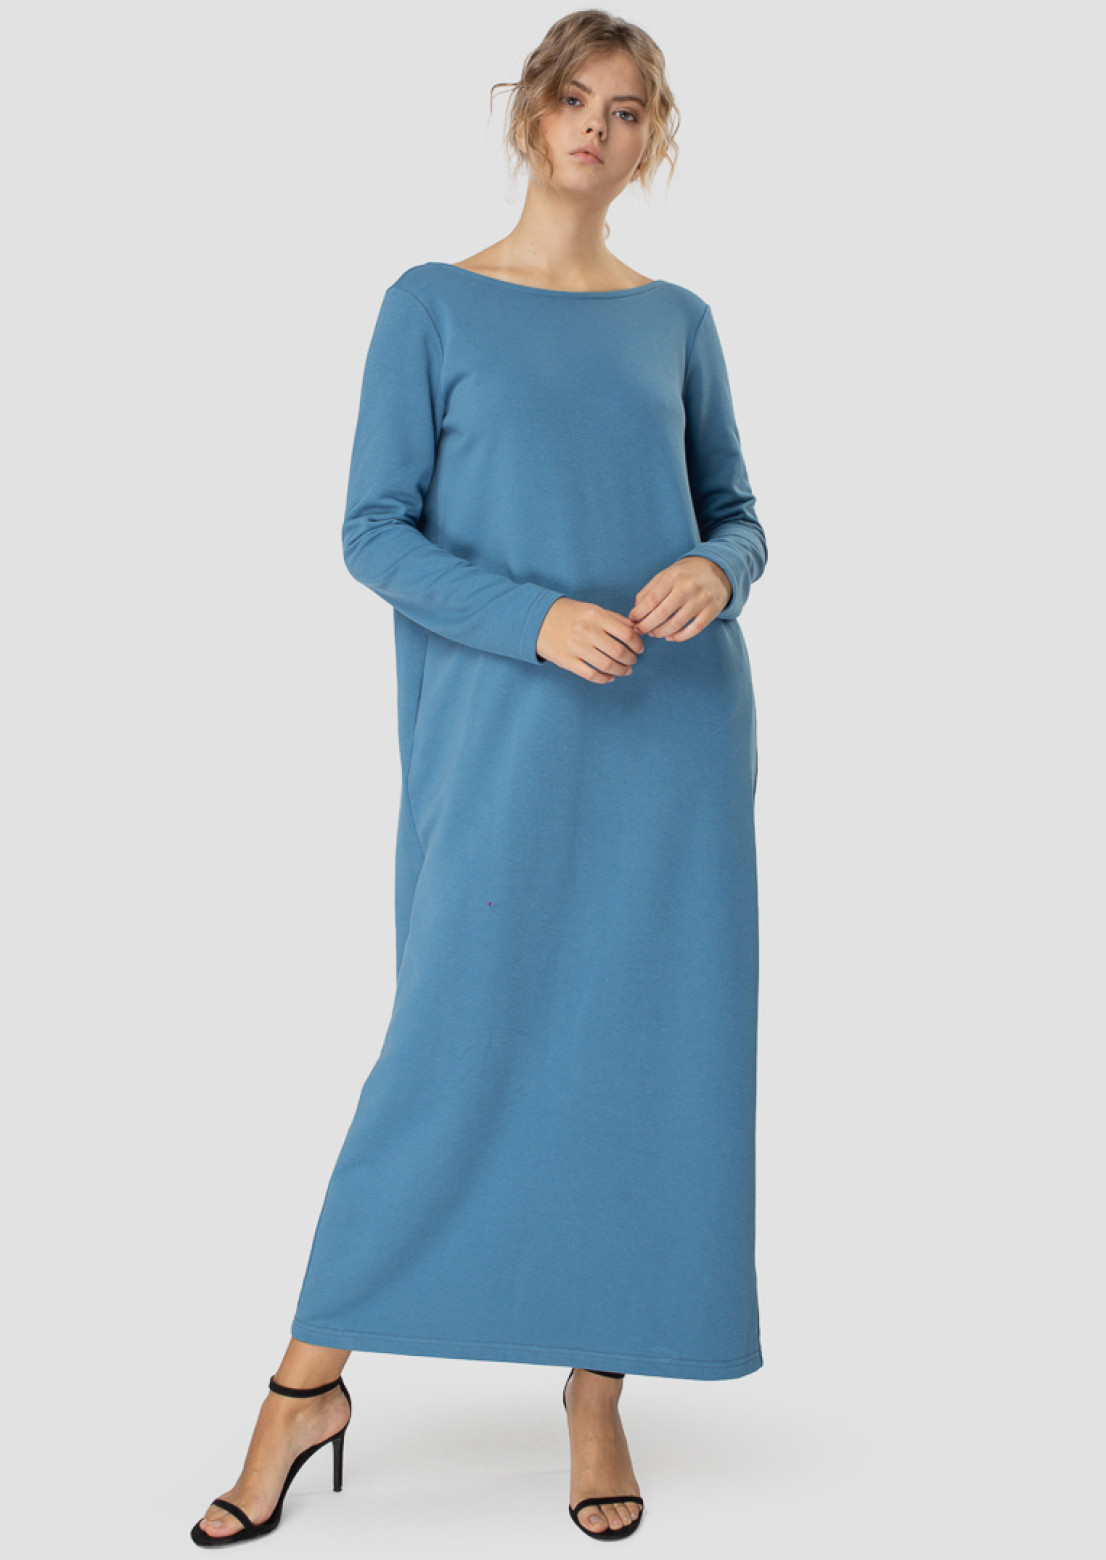 Long jeans color dress with an open back